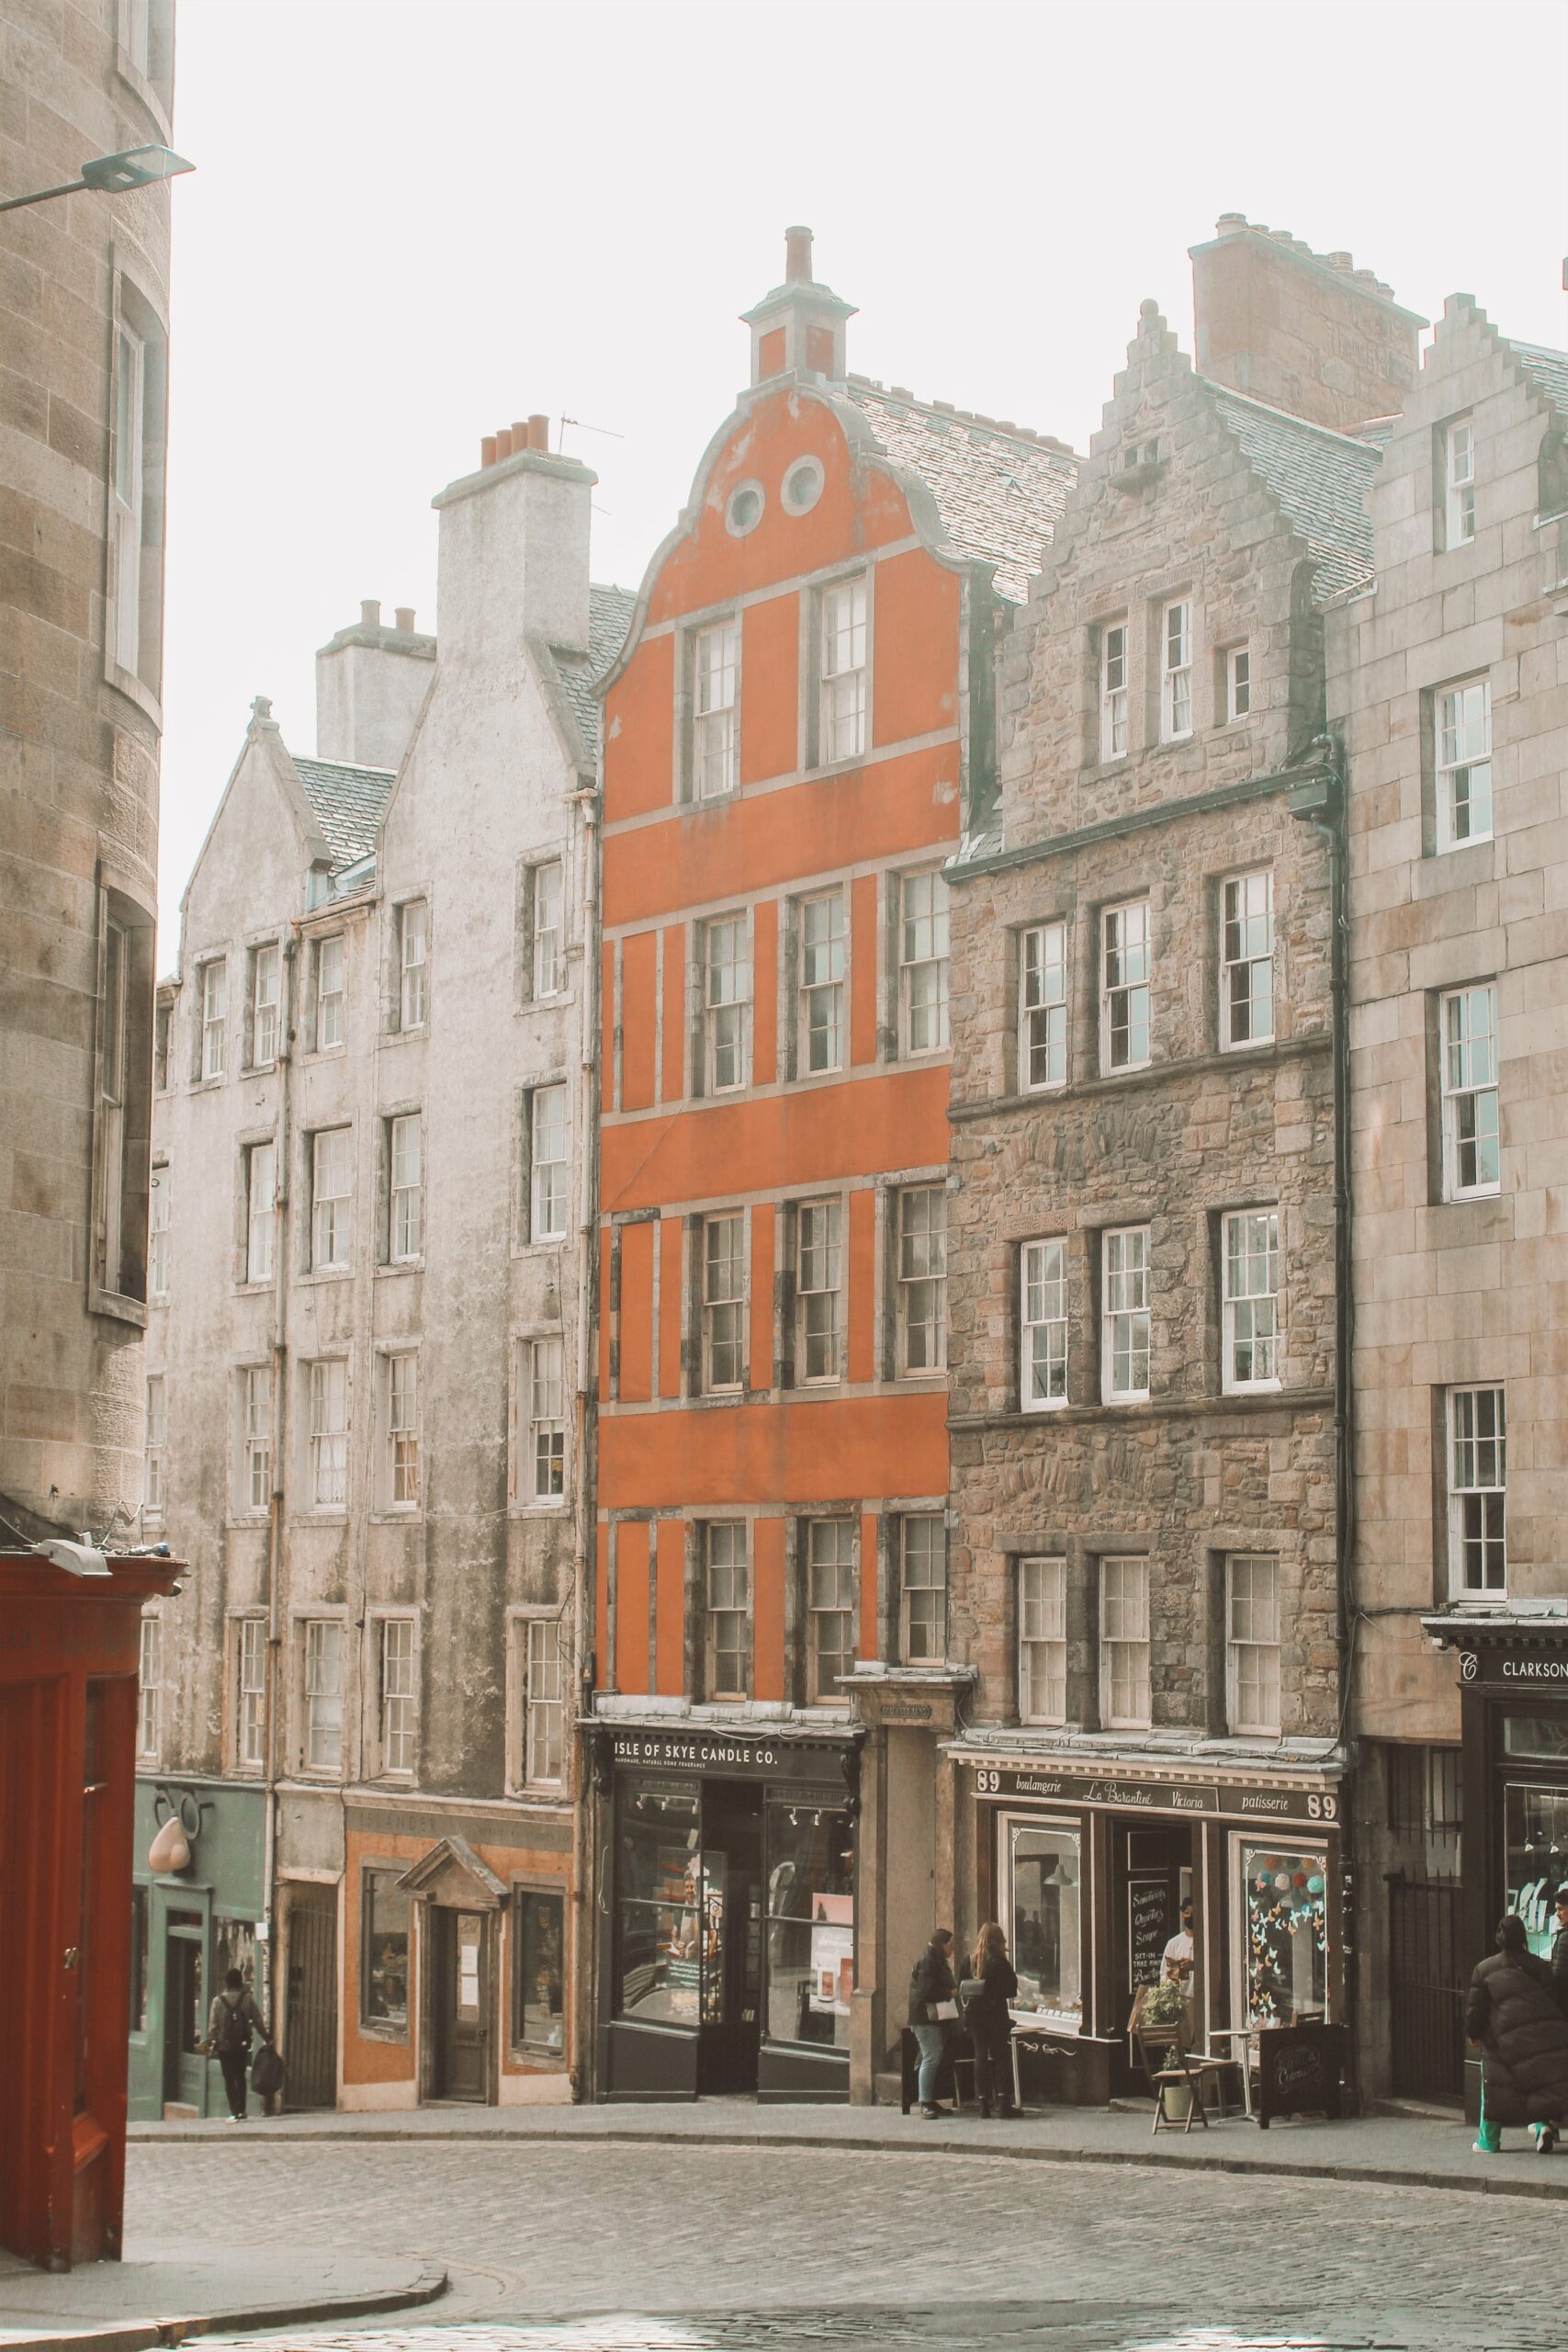 Traditional Edinburgh tenements are shown. This article covers decorating tips for Edinburgh tenements. 